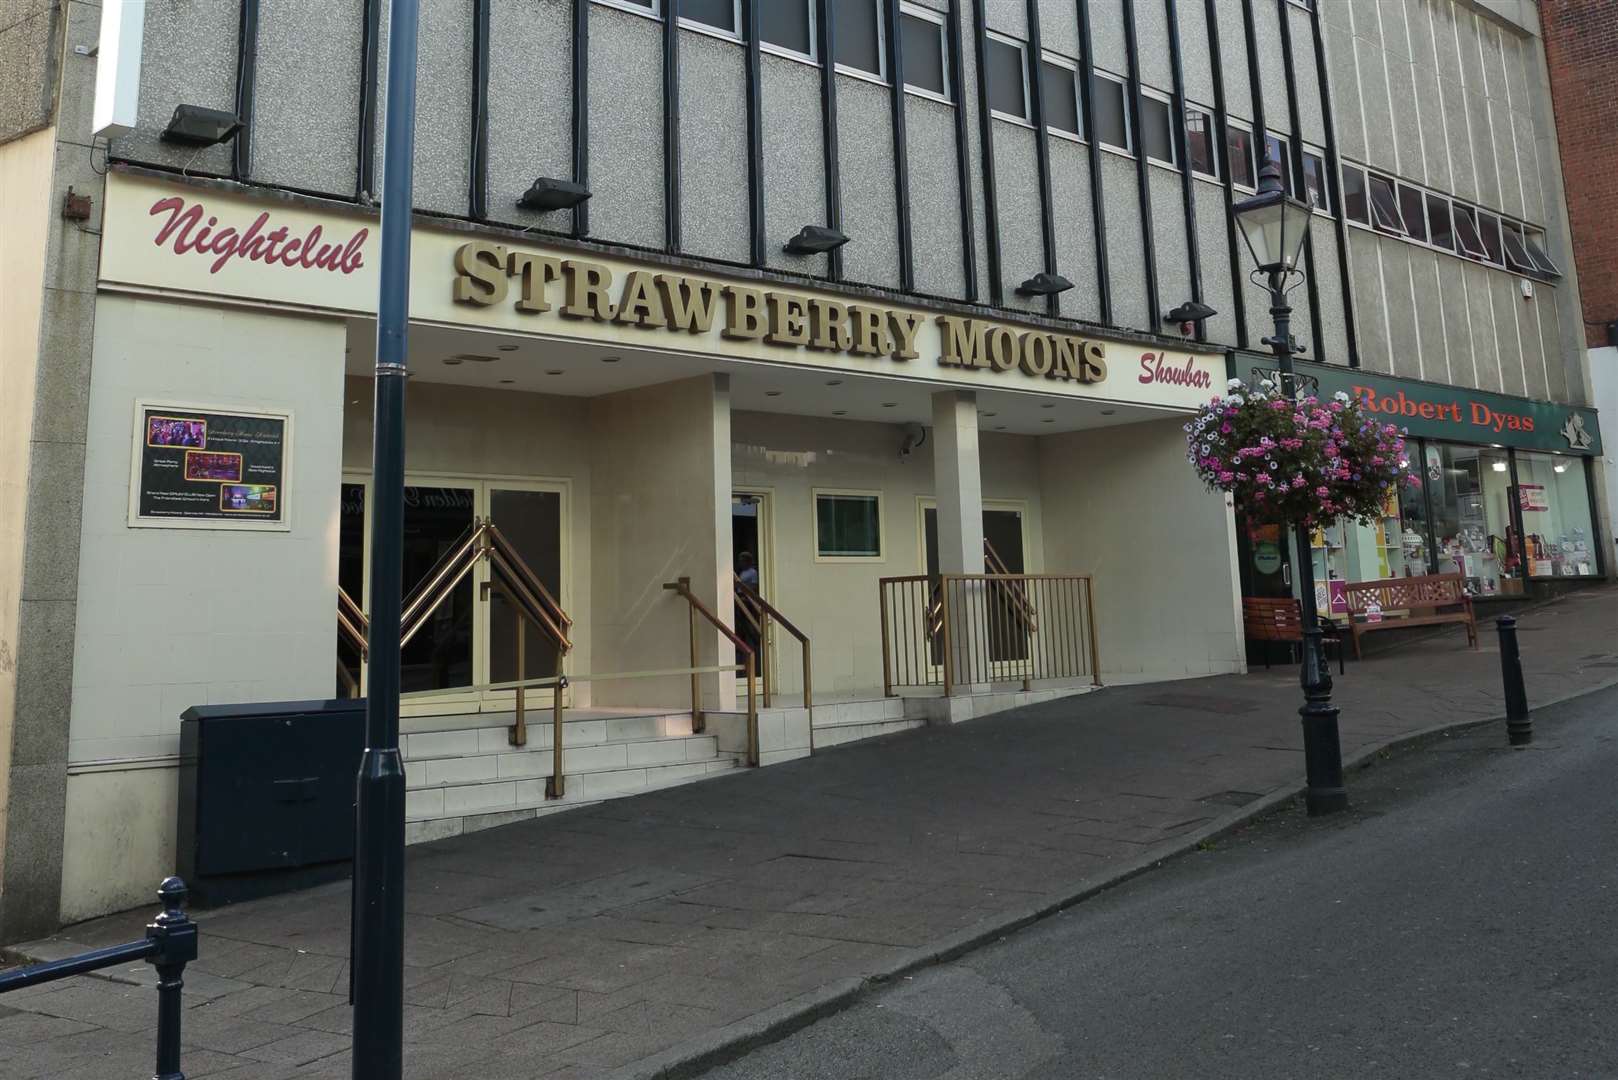 Strawberry Moons was a popular nightclub for 25 years until it closed n 2017. Picture: Martin Apps